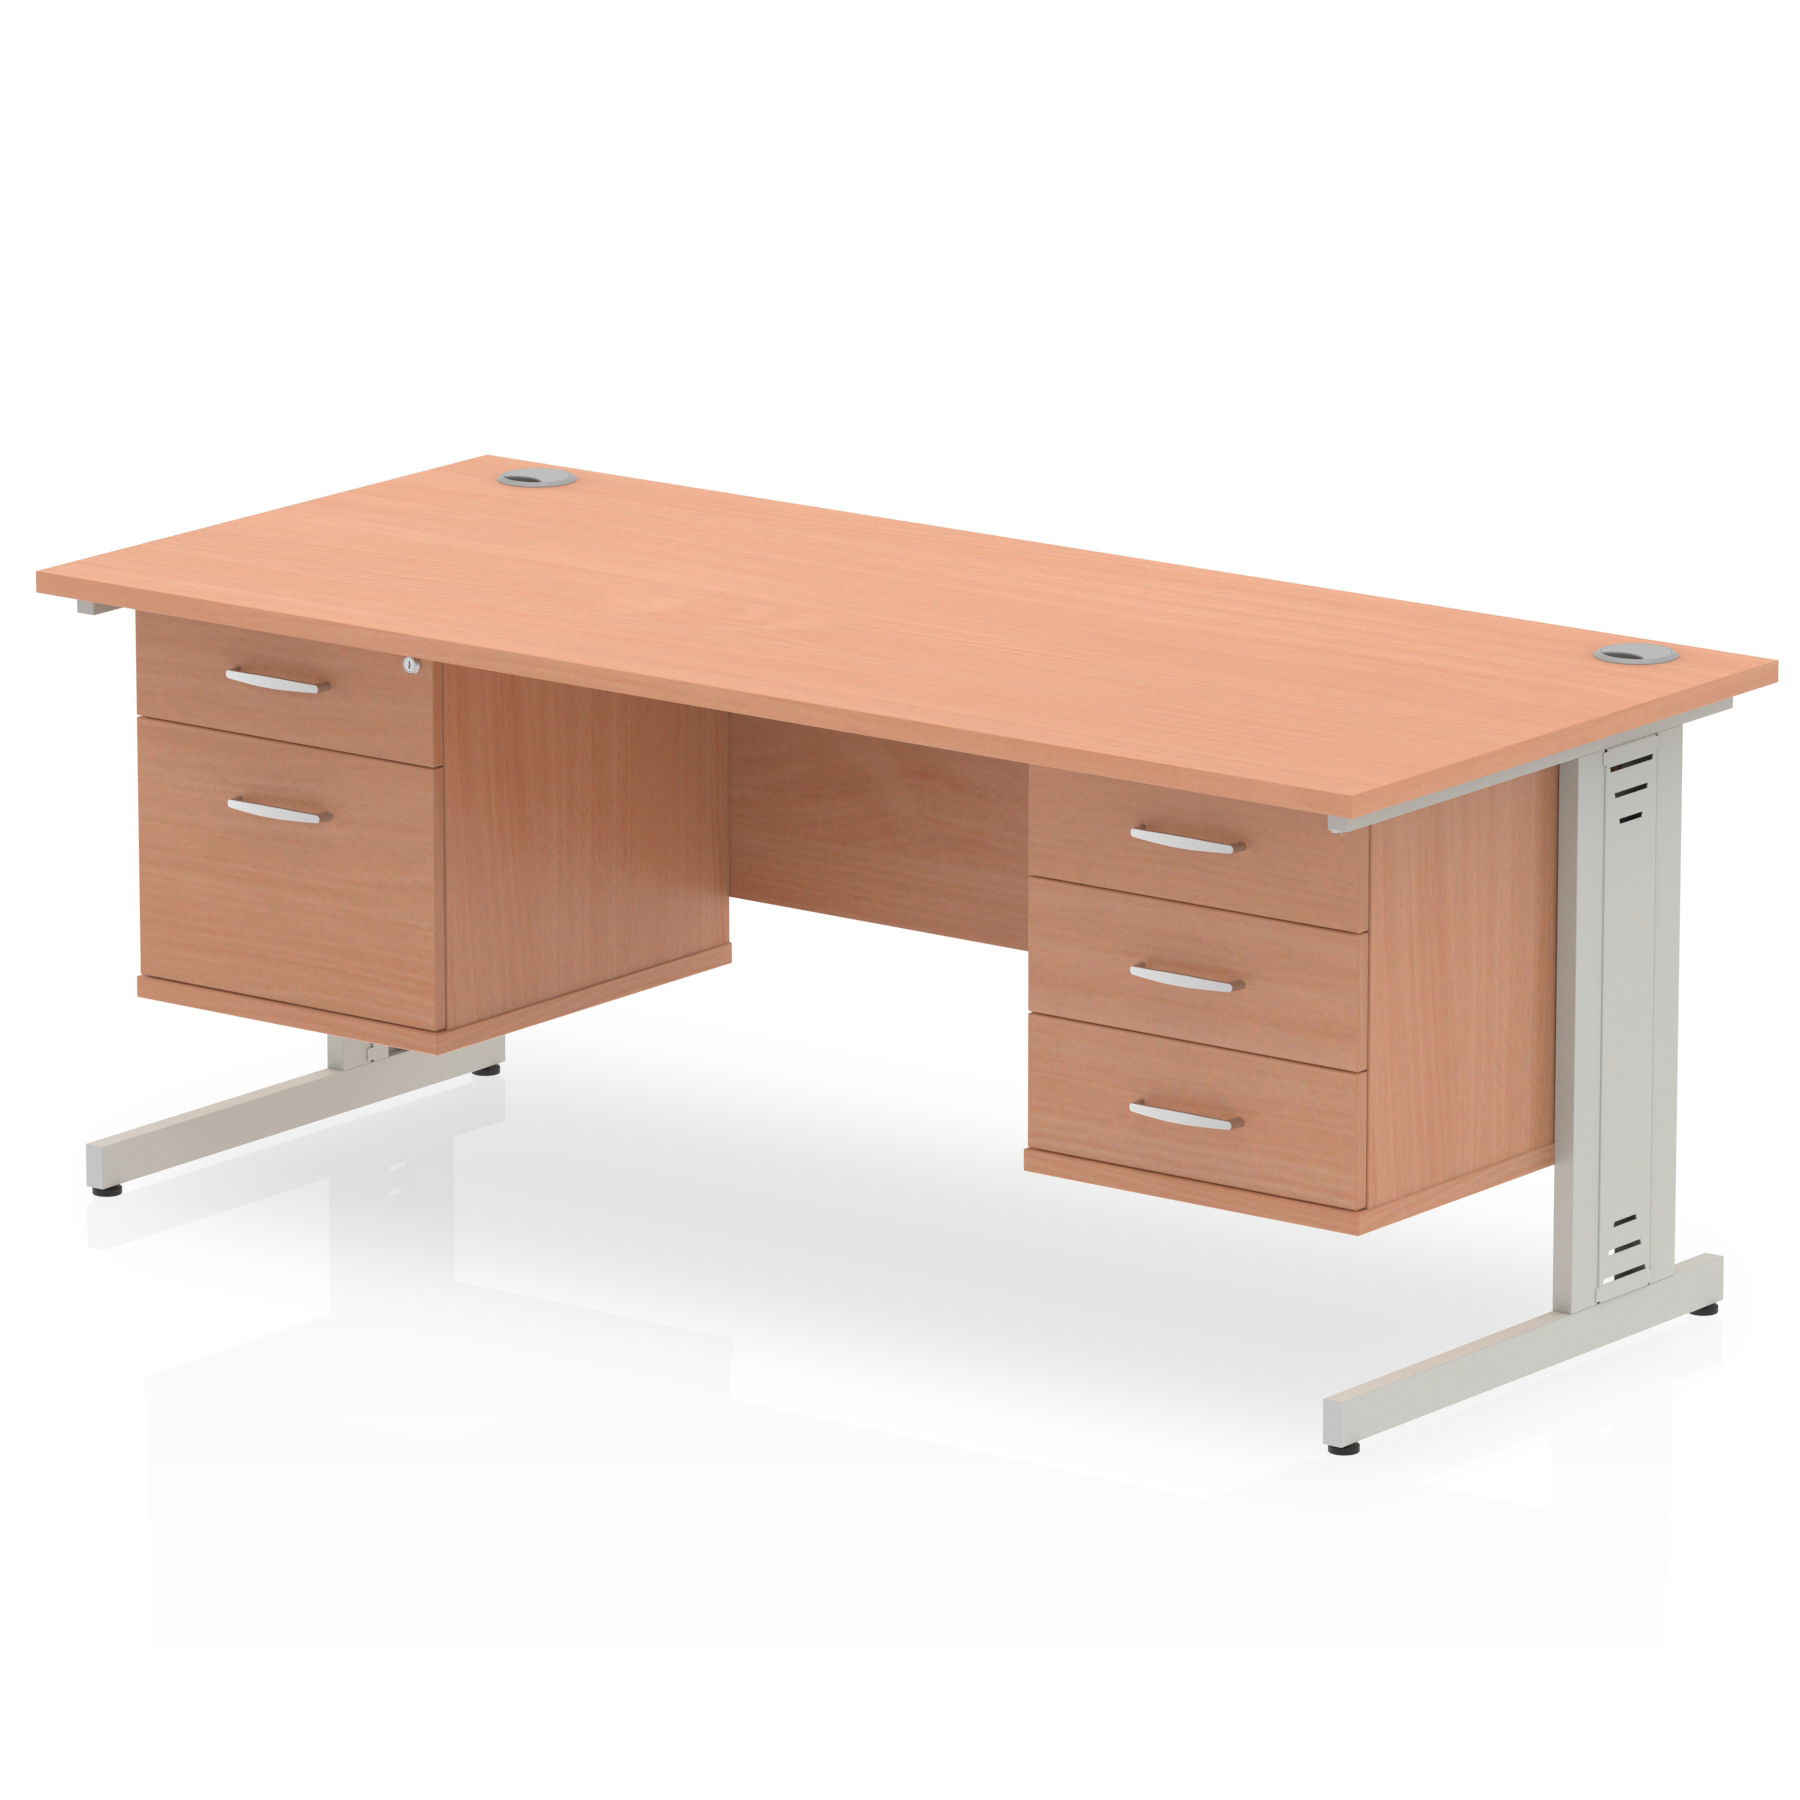 Impulse 1800 x 800mm Straight Desk Beech Top Silver Cable Managed Leg 1 x 2 Drawer 1 x 3 Drawer Fixed Pedestal